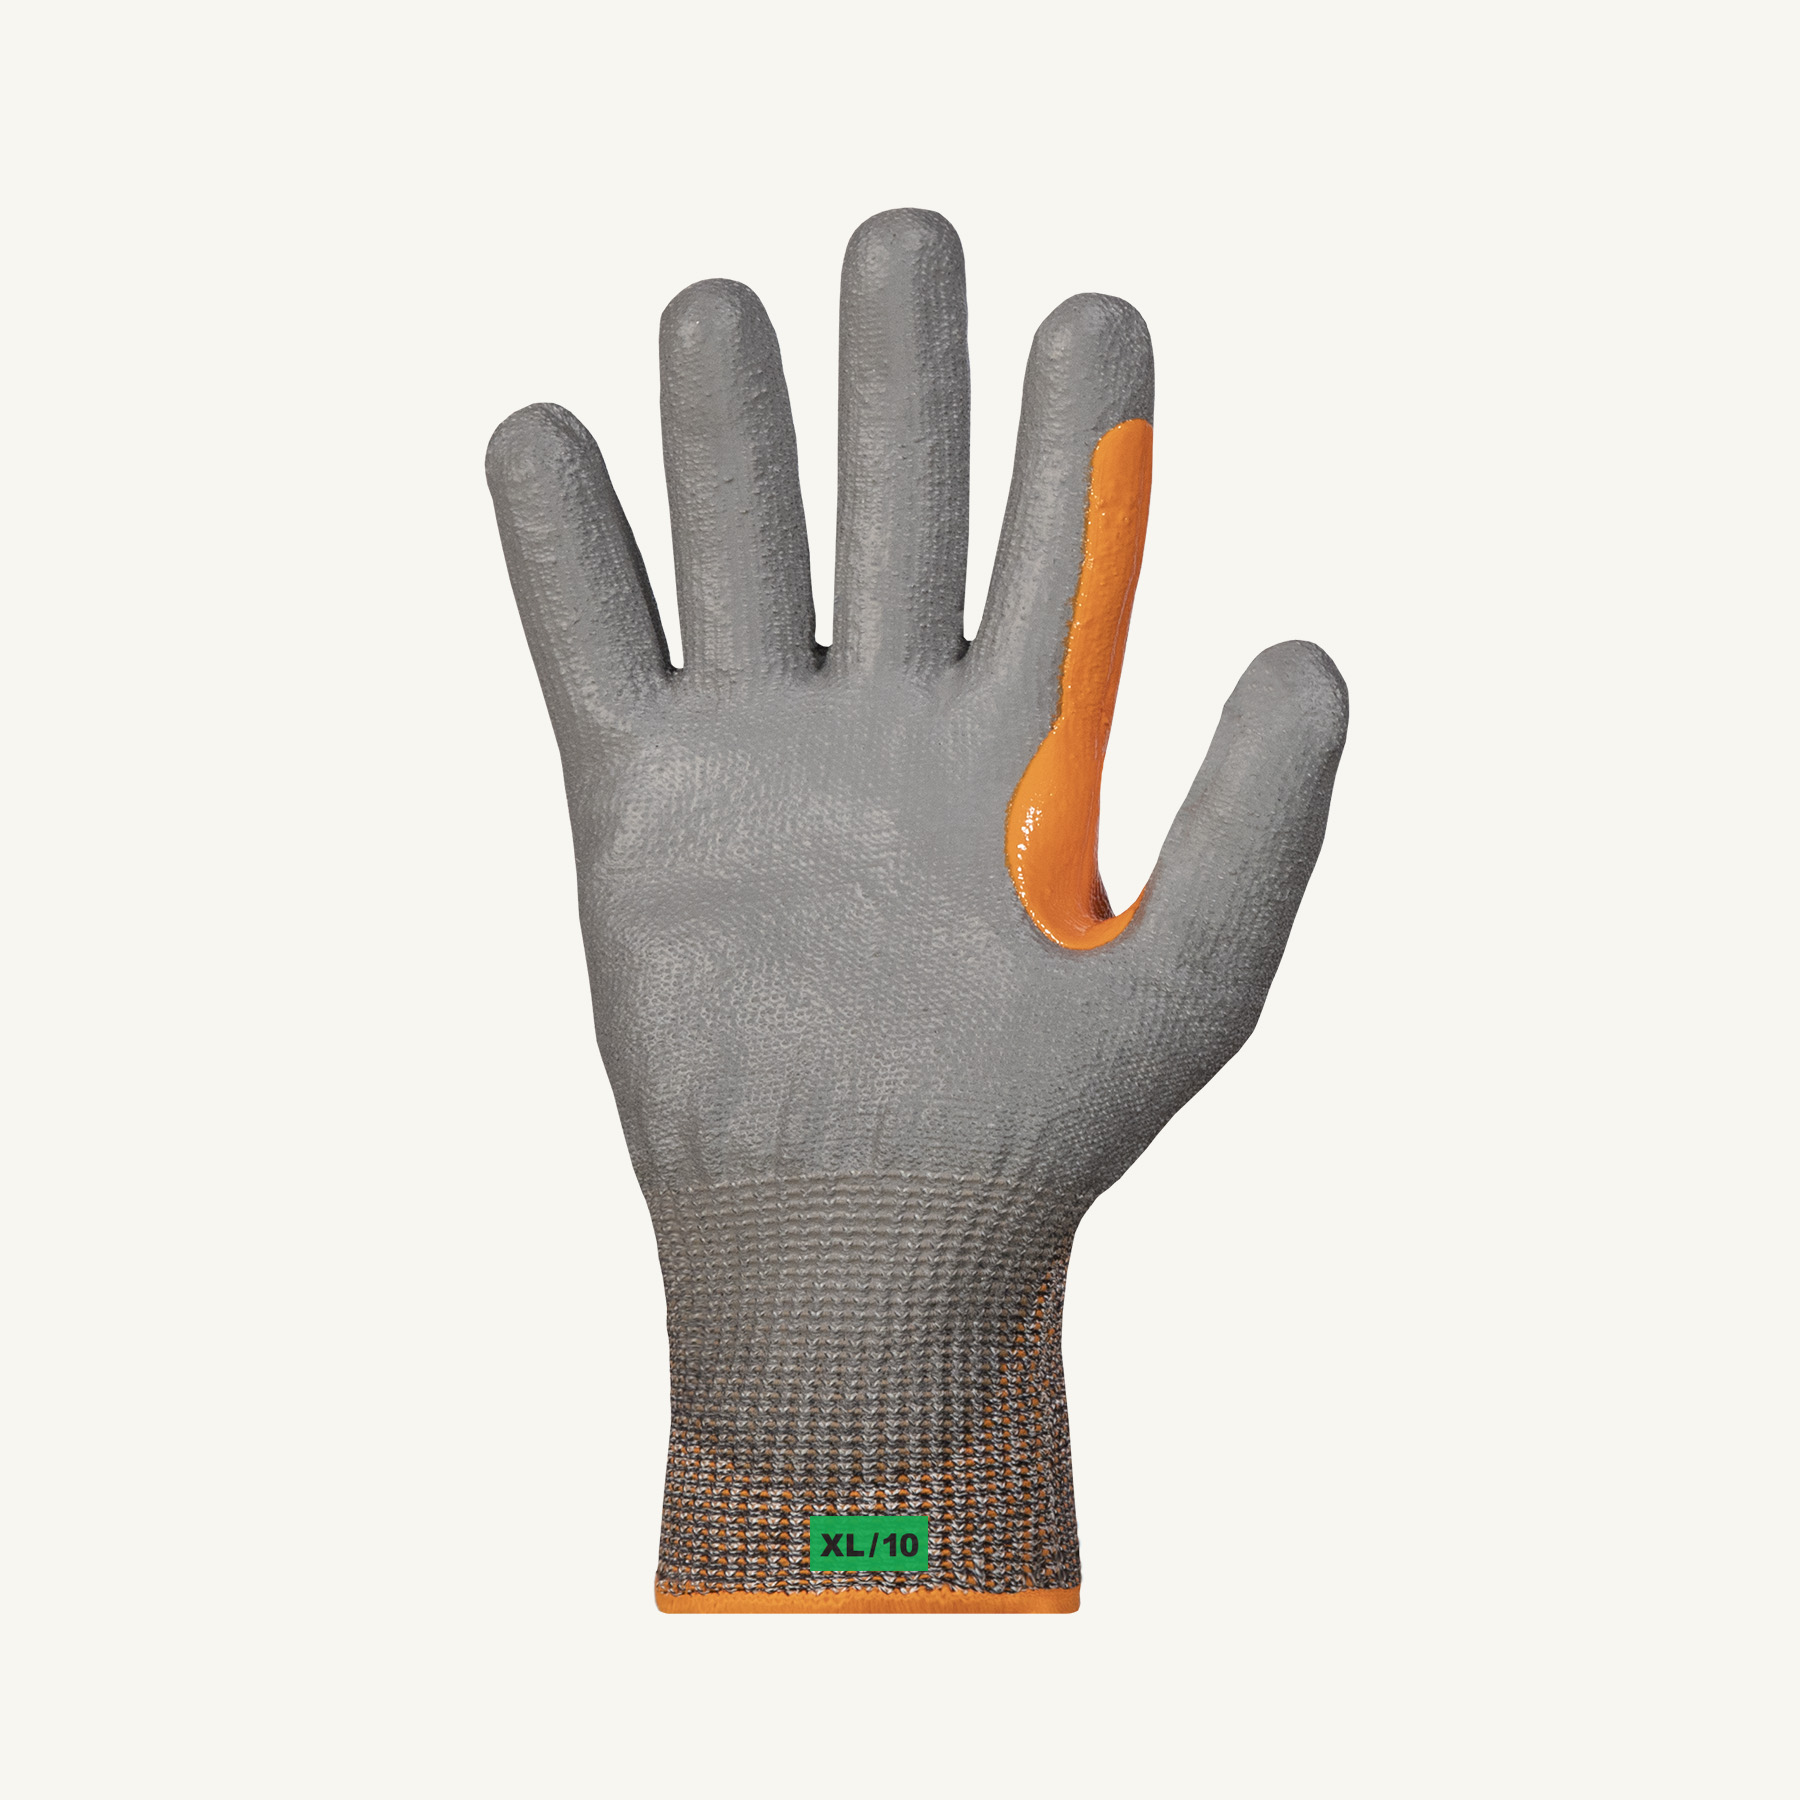 #STACXPURT - Superior Glove® TenActiv™ Polyurethane Palm Coated Gloves with Reinforced Thumbs